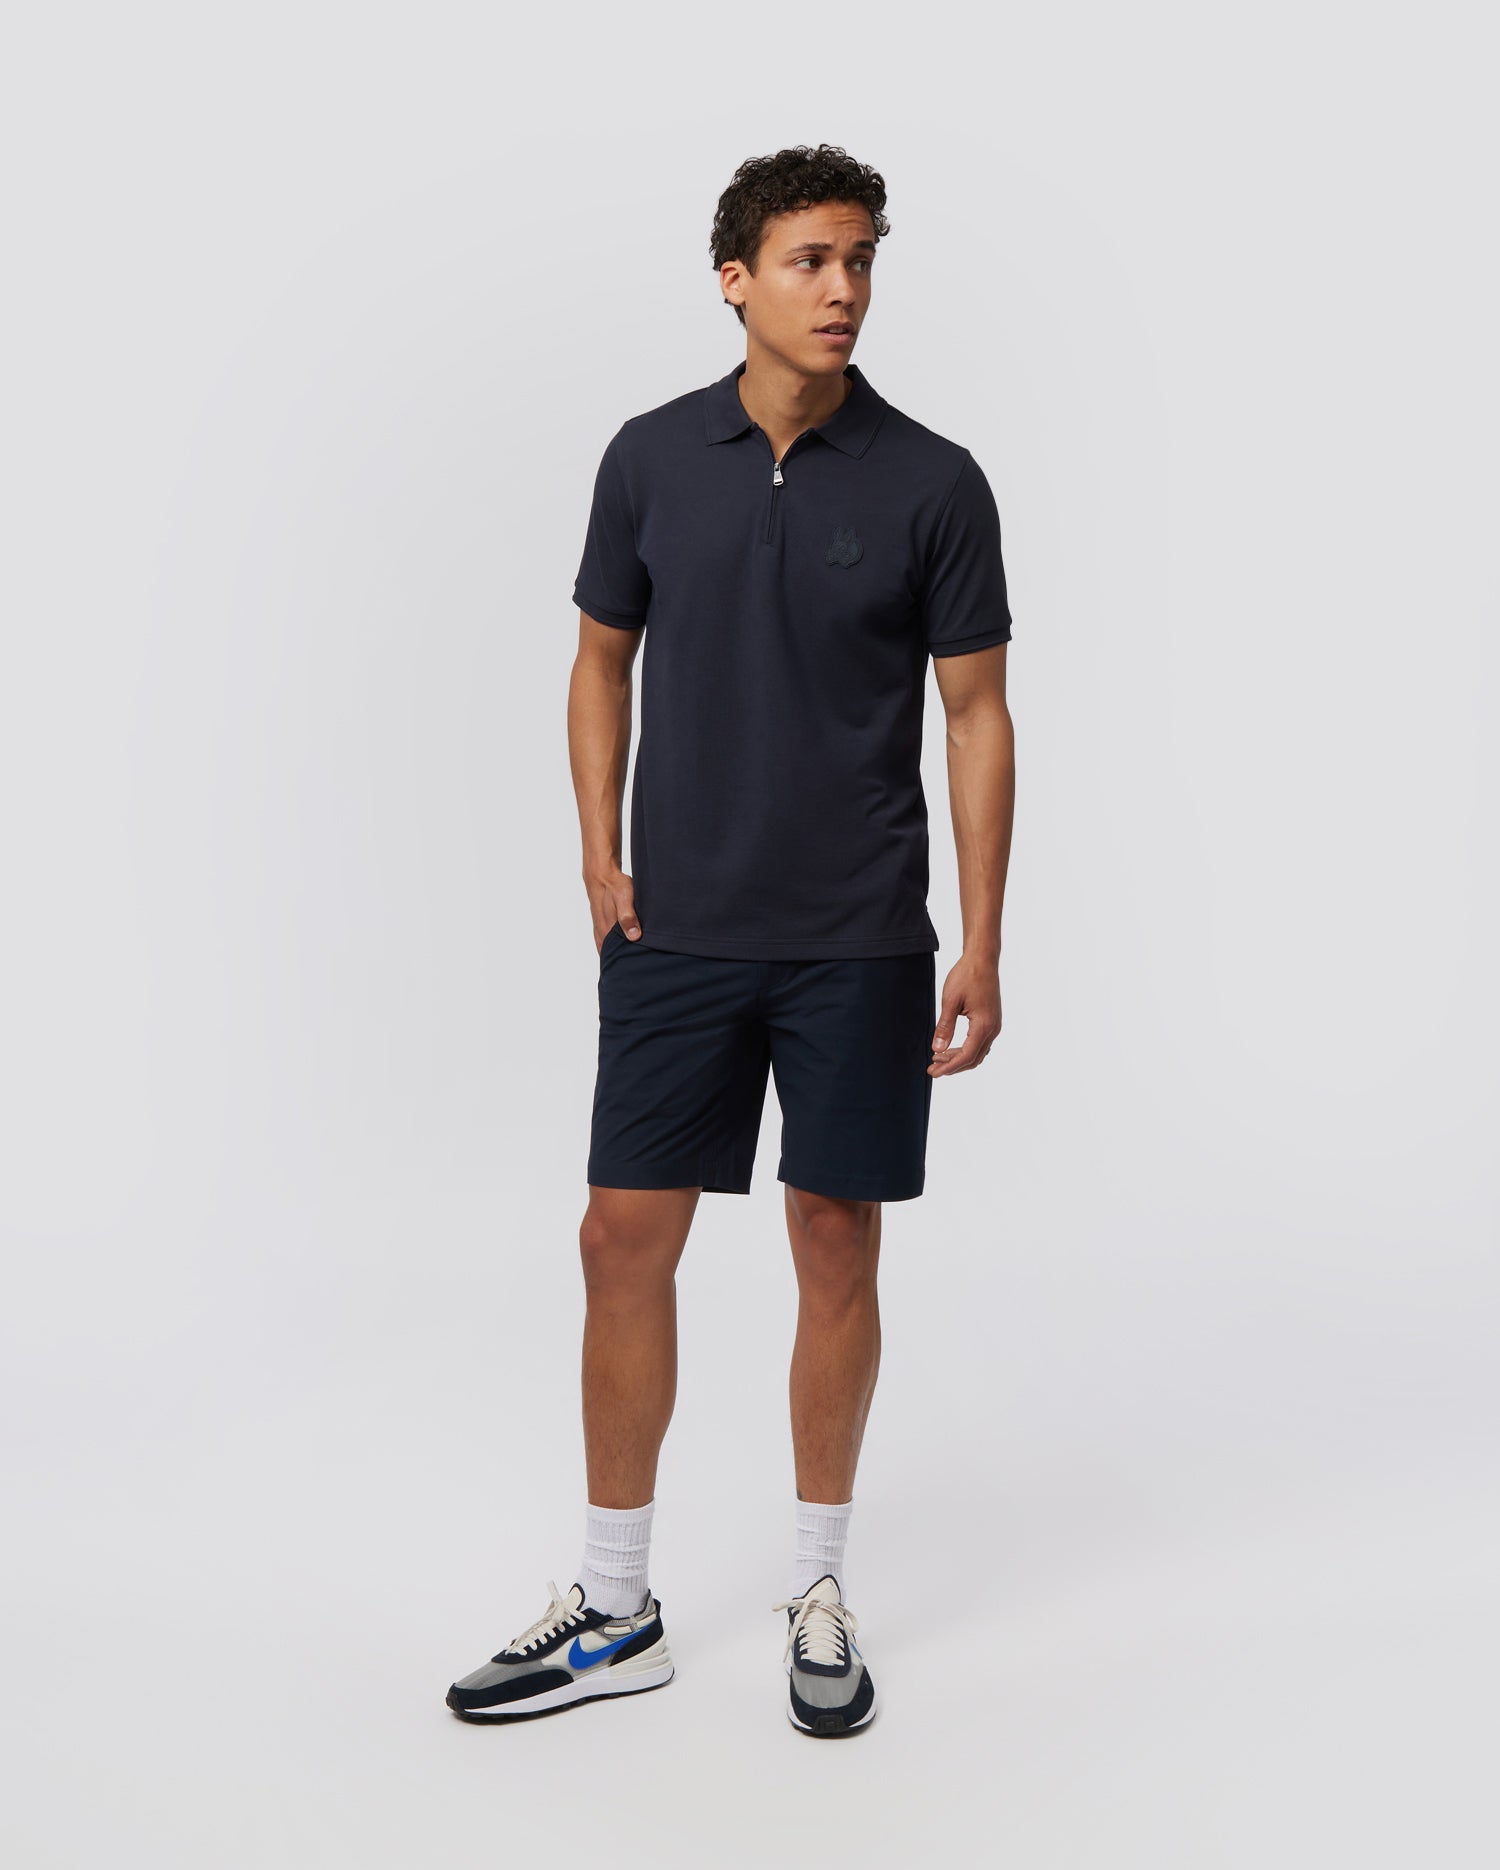 A person stands against a plain white background wearing a navy blue polo shirt and Psycho Bunny MENS GABLE REGULAR FIT SPORT SHORT - B6R761ARCN made from durable stretch cotton-nylon. They have short, curly hair and are dressed casually with white socks and white sneakers featuring blue and black accents. The shorts feature a hidden zip pocket for convenience.